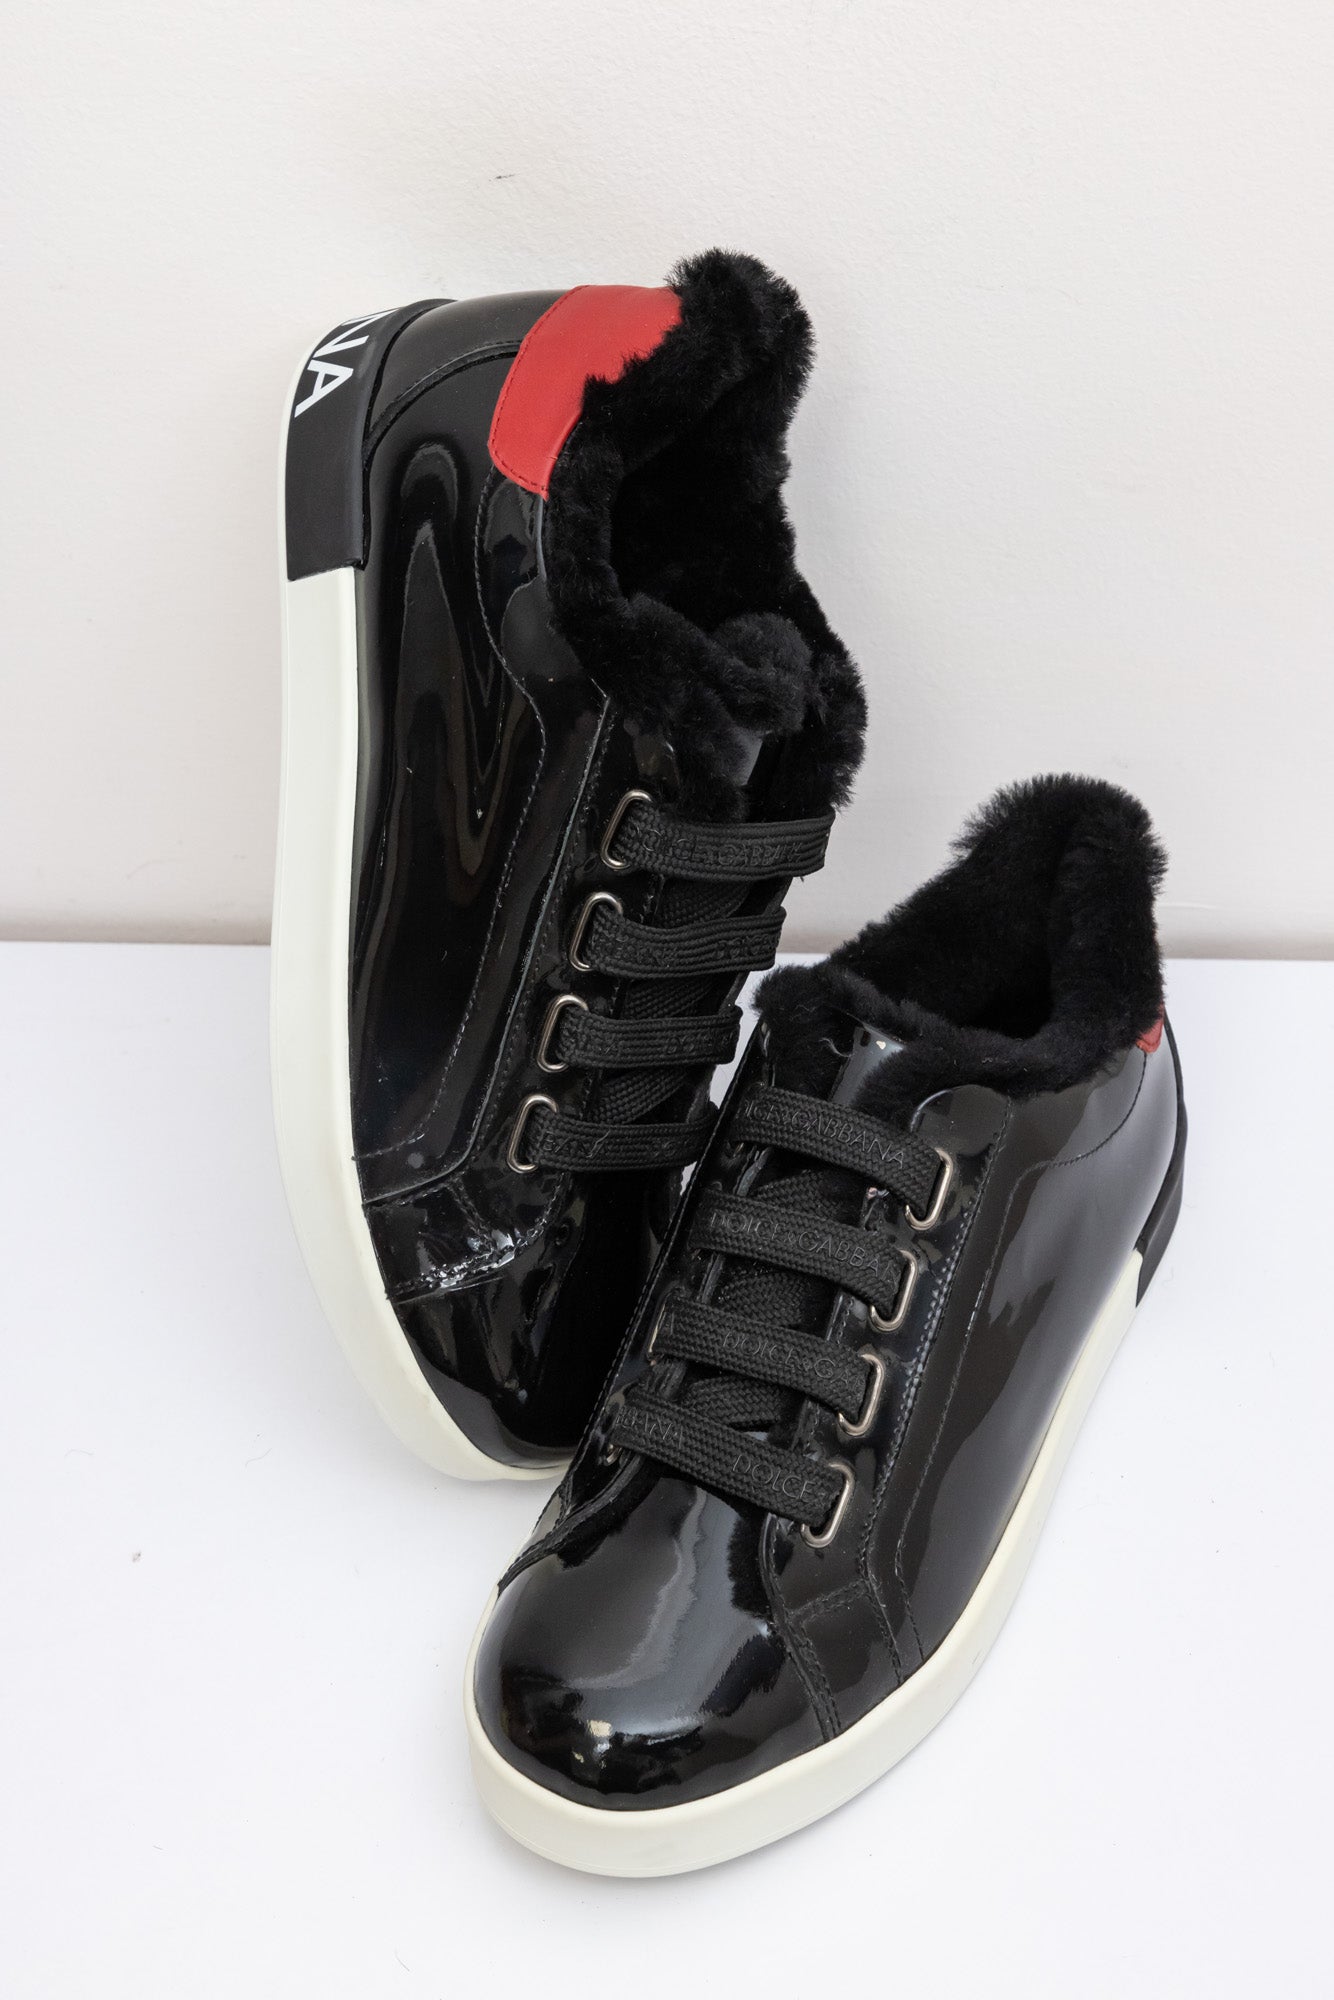 DOLCE & GABBANA Patent Leather Sneakers with Lamb Fur